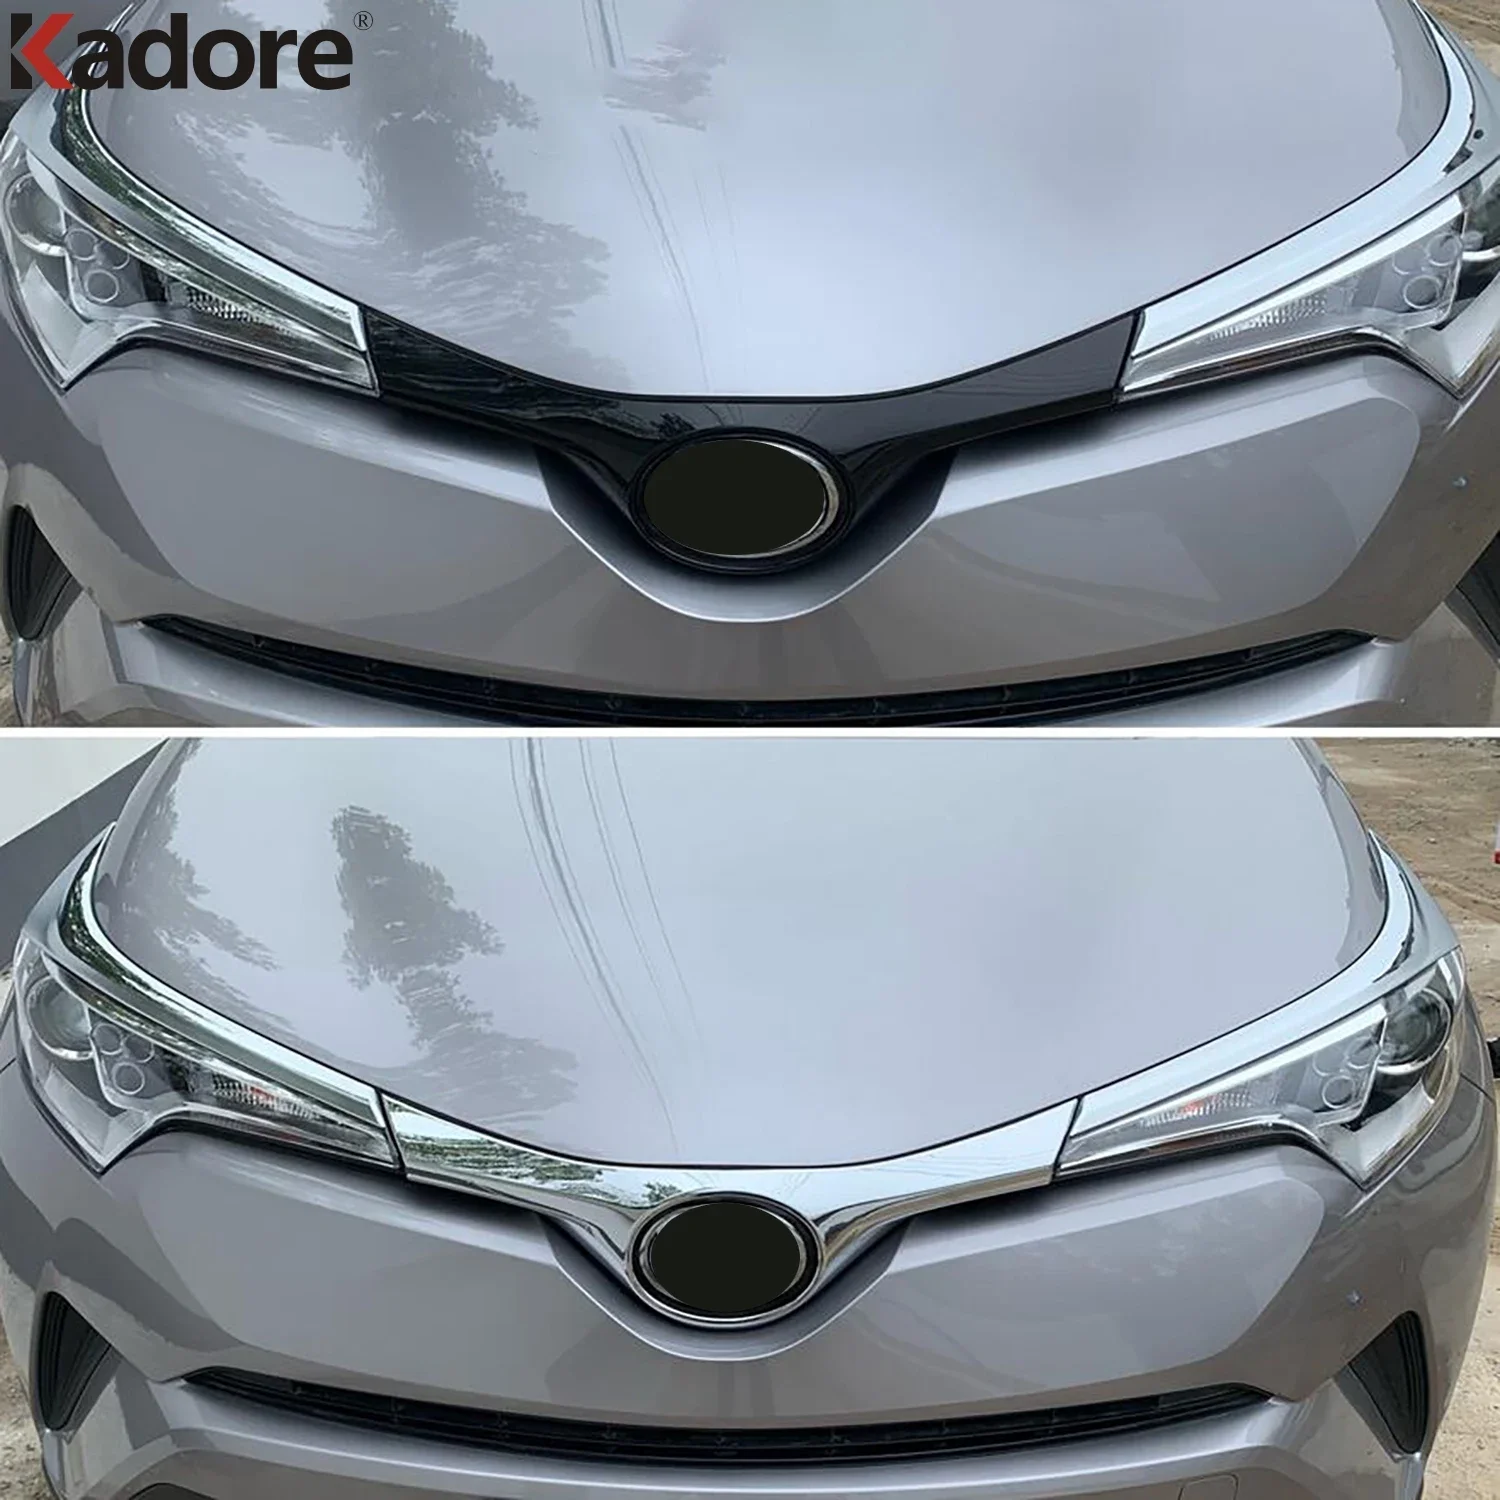 

For Toyota C-HR CHR 2016 2017 2018 2019 Chrome Front Grille Cover Trim Molding Garnish Protector Sticker Car Accessories